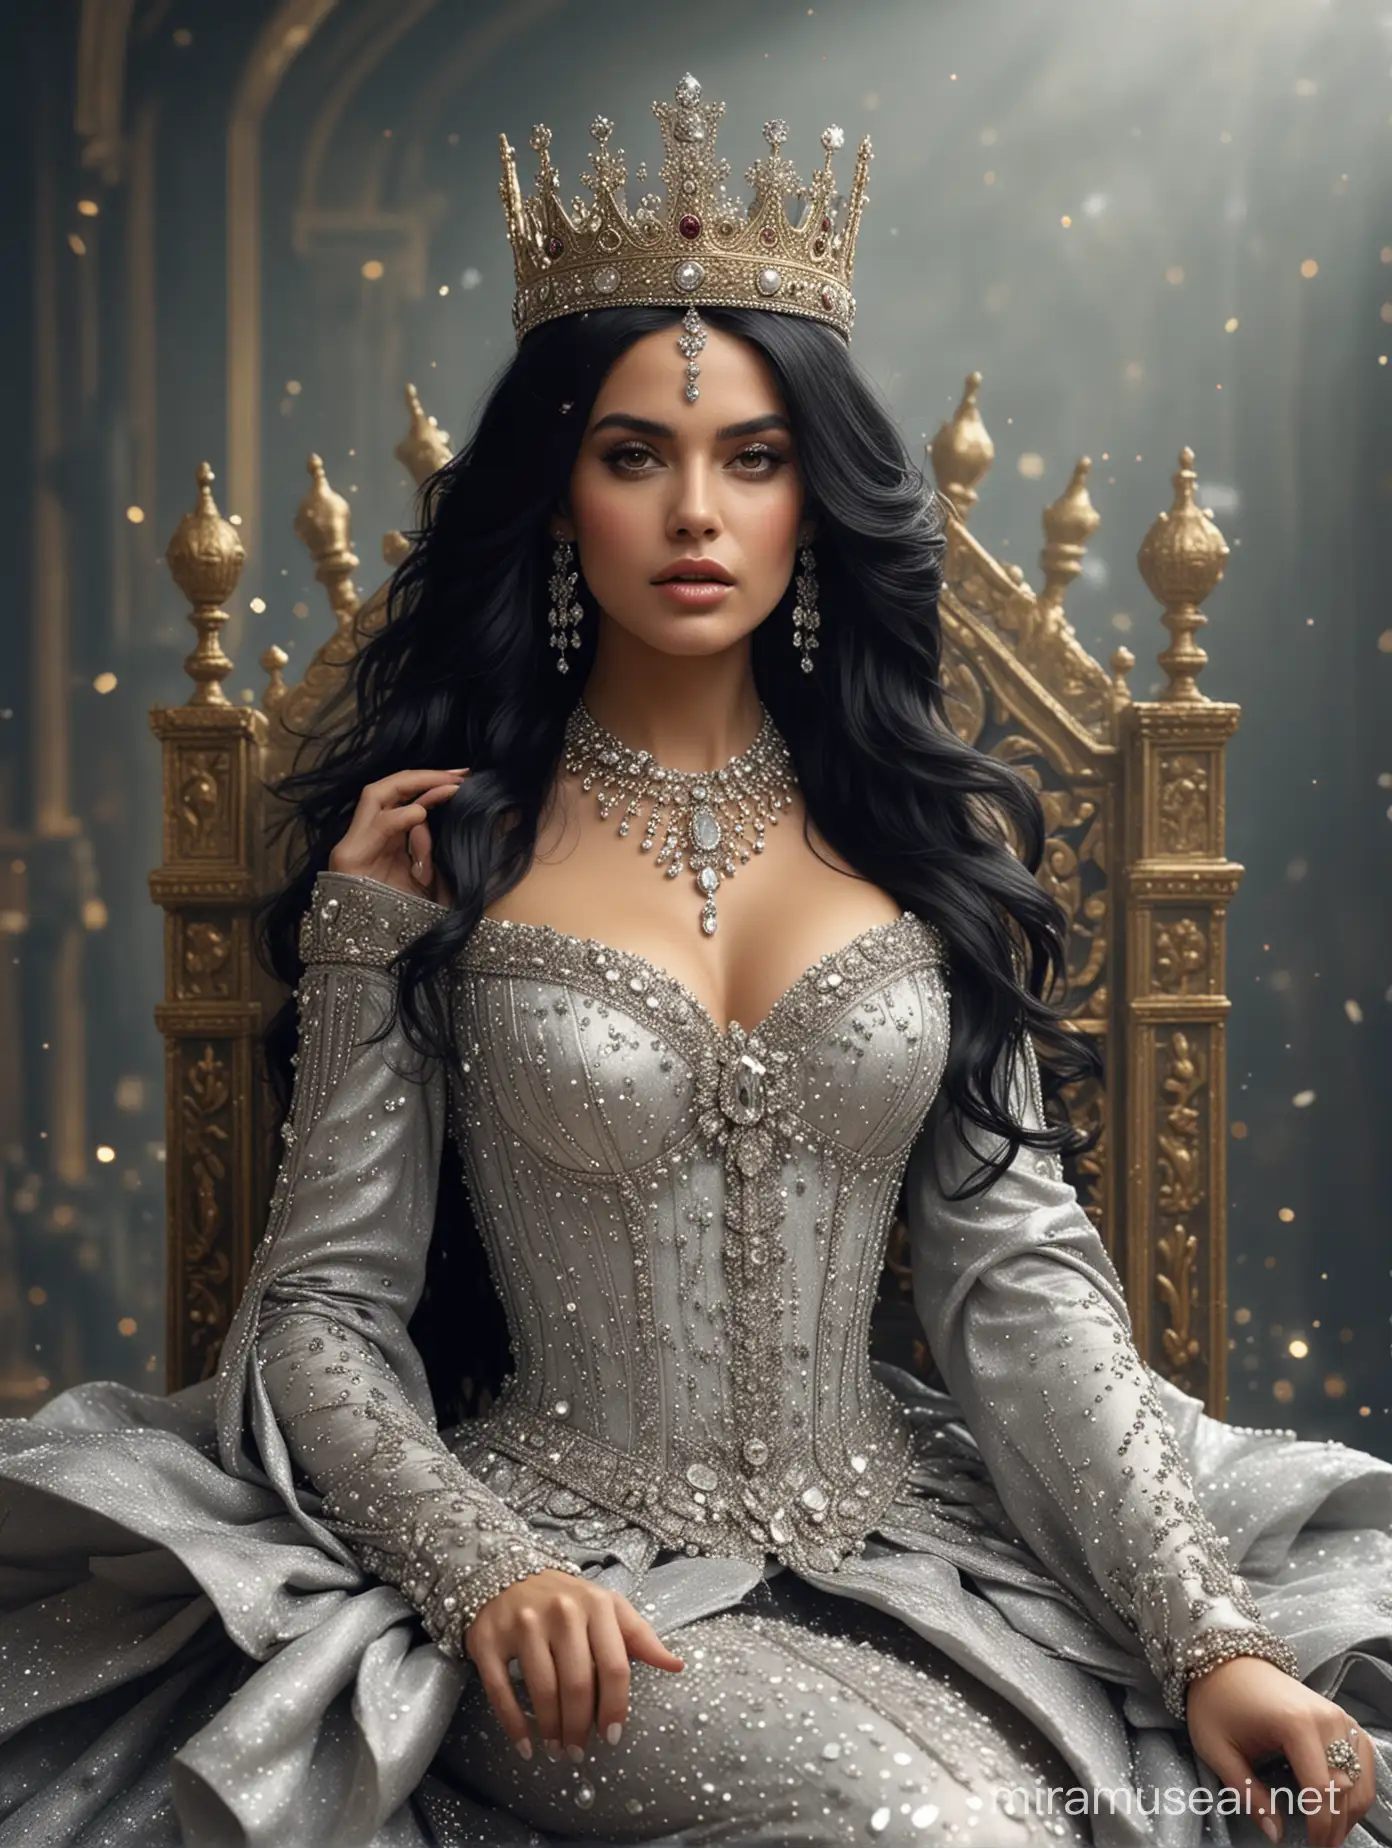 Regal Queen in Silver Gown with Diamond Tiara and Rose Embellishments